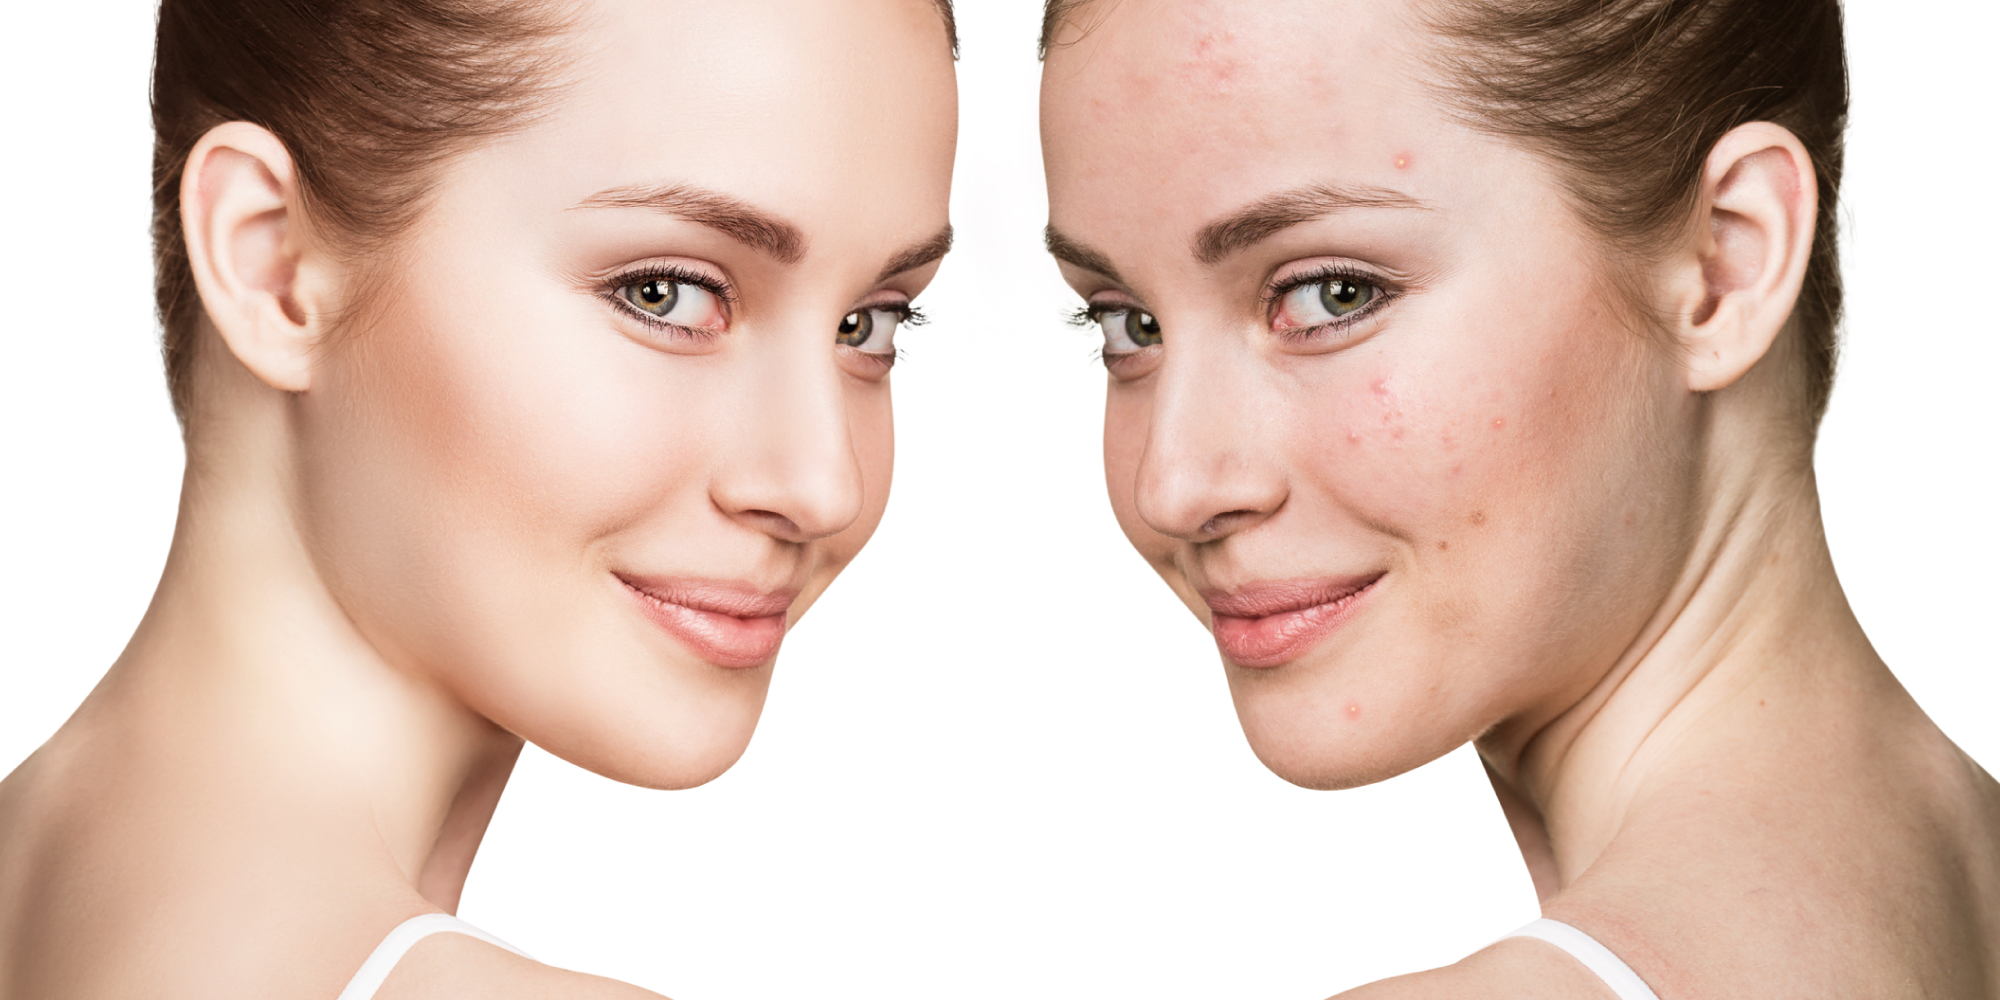 4 Scientifically Proven Forms Of Anti-Androgens That Keep Acne At Bay